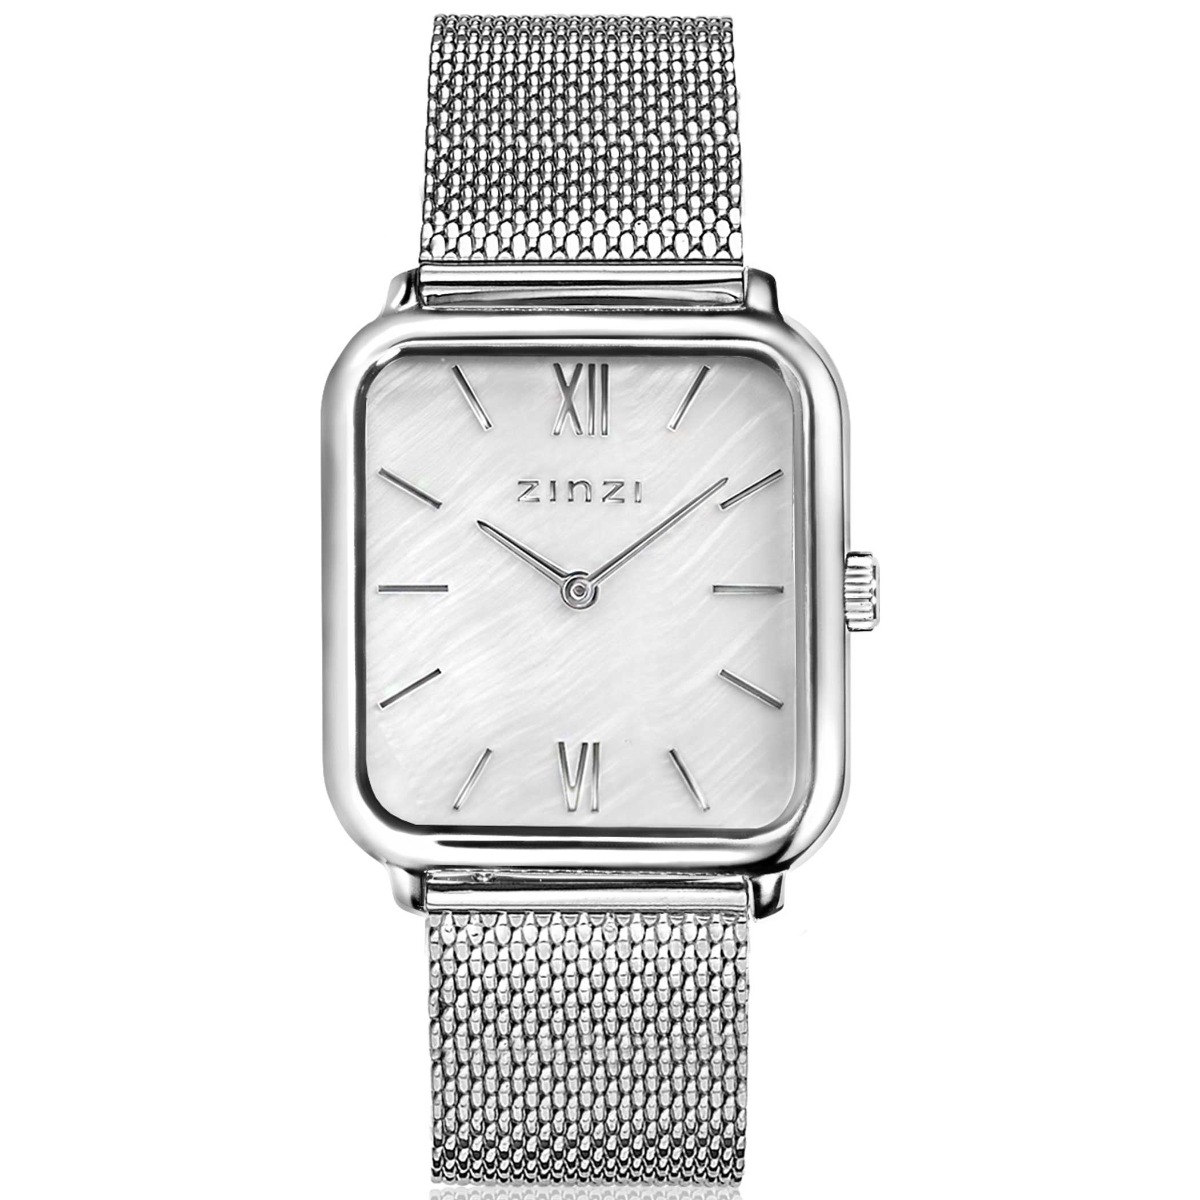 ZINZI Square Roman Watch 32mm White Mother-of-Pearl Dial Silver Colored Square Case and Mesh Strap ZIW821M